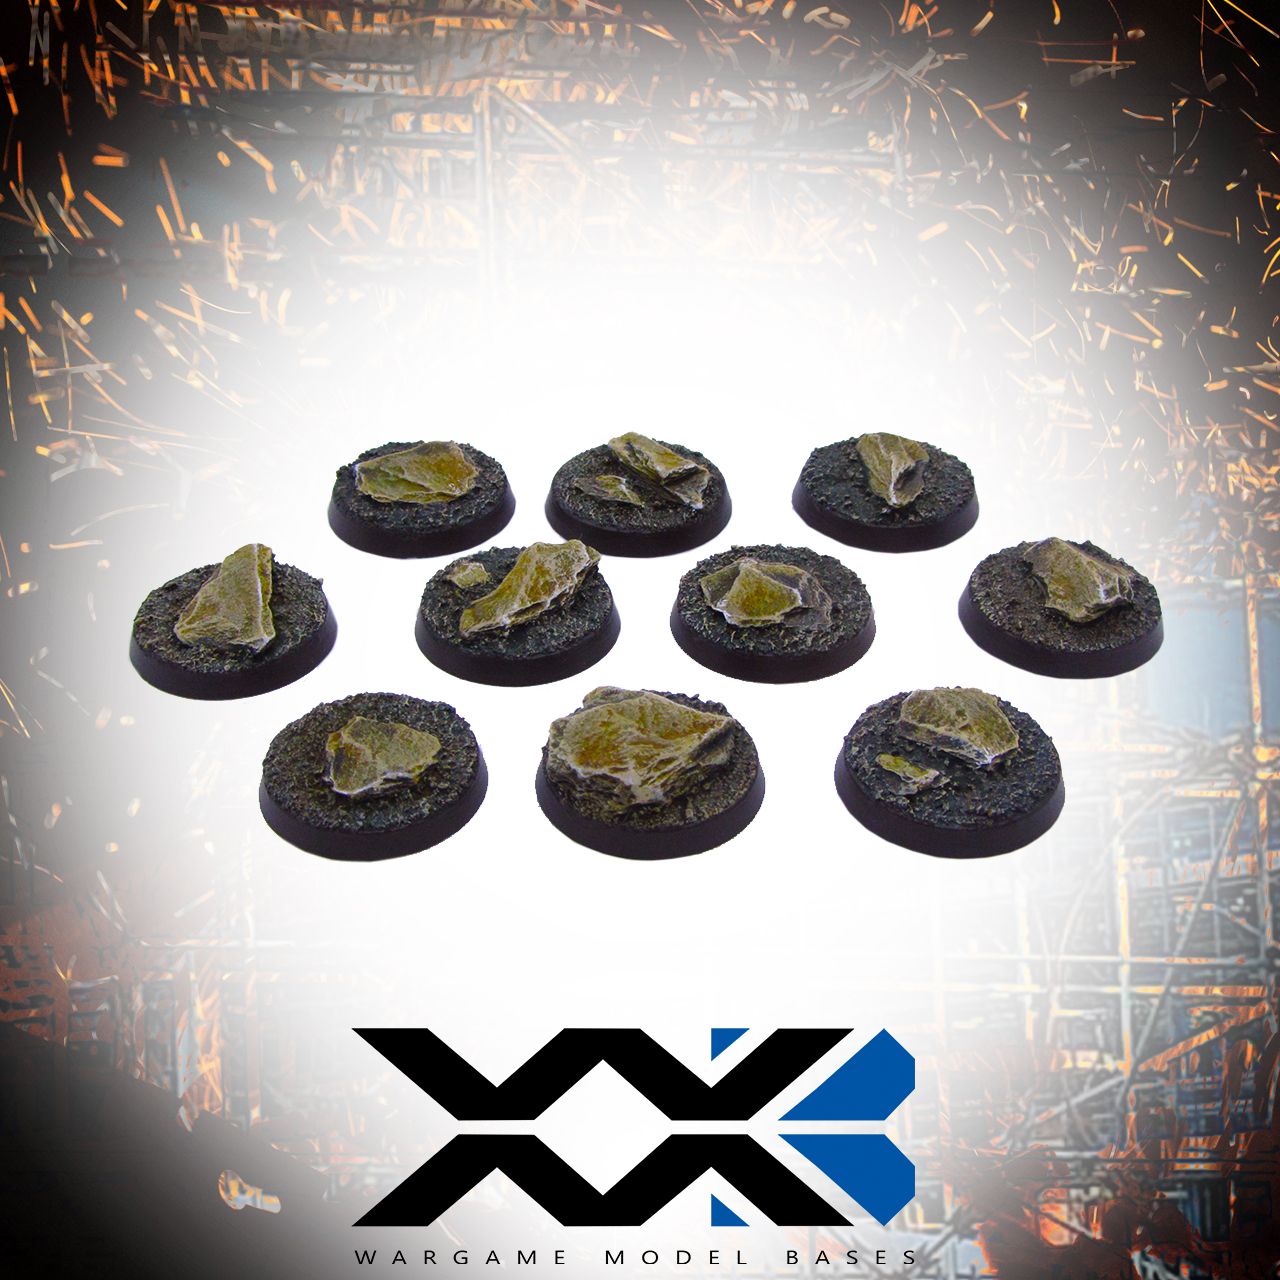 25mm Rocky bases